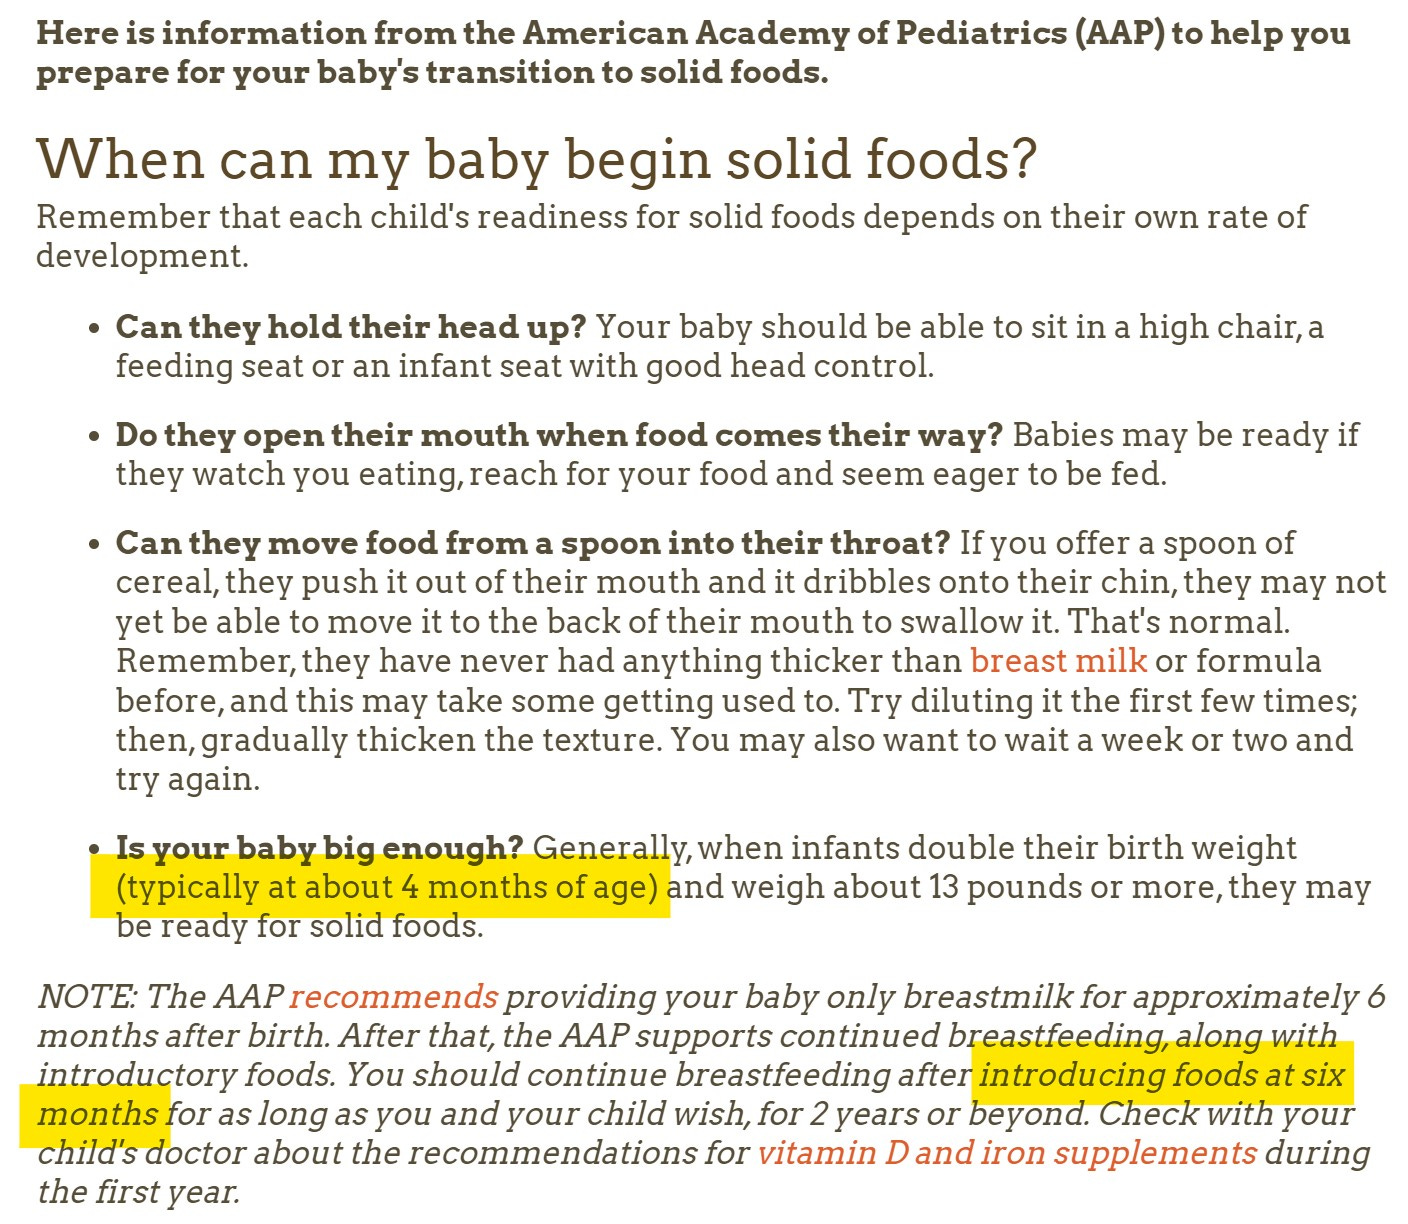 This is a screen shot from the AAP's page on introducing foods. The website url is in the caption. It reads: Here is information from the American Academy of Pediatrics (AAP) to help you prepare for your baby's transition to solid foods.  When can my baby begin solid foods? Remember that each child's readiness for solid foods depends on their own rate of development.  Can they hold their head up? Your baby should be able to sit in a high chair, a feeding seat or an infant seat with good head control.  Do they open their mouth when food comes their way? Babies may be ready if they watch you eating, reach for your food and seem eager to be fed.  Can they move food from a spoon into their throat? If you offer a spoon of cereal, they push it out of their mouth and it dribbles onto their chin, they may not yet be able to move it to the back of their mouth to swallow it. That's normal. Remember, they have never had anything thicker than breast milk or formula before, and this may take some getting used to. Try diluting it the first few times; then, gradually thicken the texture. You may also want to wait a week or two and try again.  Is your baby big enough? Generally, when infants double their birth weight (typically at about 4 months of age) and weigh about 13 pounds or more, they may be ready for solid foods.  NOTE: The AAP recommends providing your baby only breastmilk for approximately 6 months after birth. After that, the AAP supports continued breastfeeding, along with introductory foods. You should continue breastfeeding after introducing foods at six months for as long as you and your child wish, for 2 years or beyond. Check with your child's doctor about the recommendations for vitamin D and iron supplements during the first year.